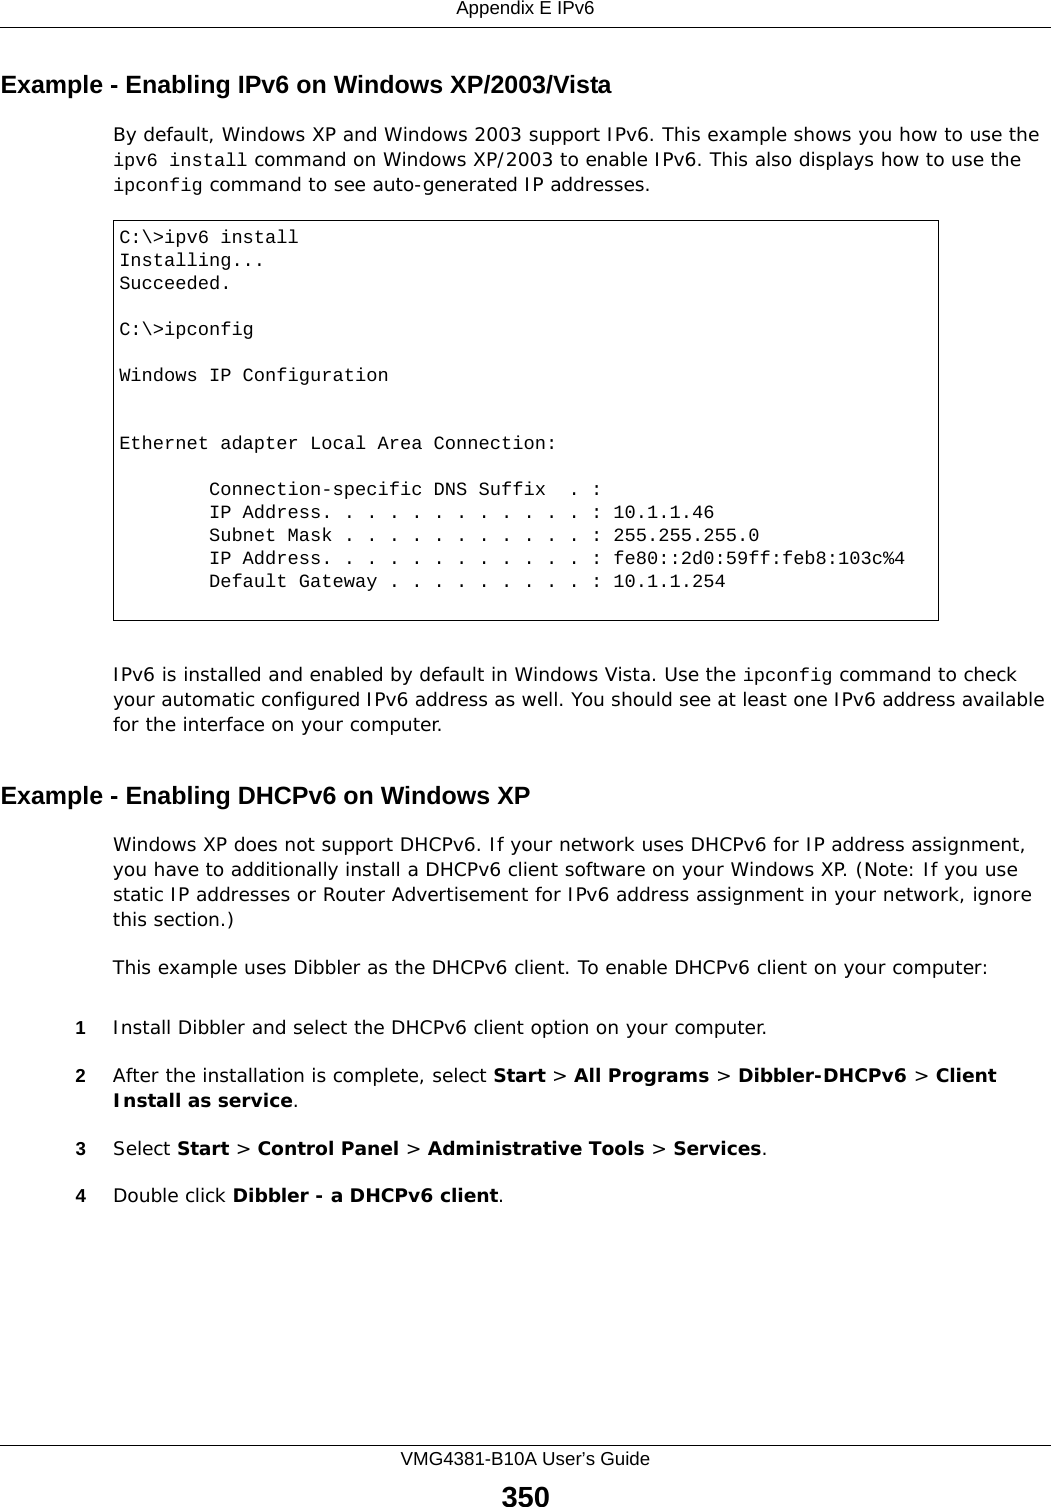 Appendix E IPv6VMG4381-B10A User’s Guide350Example - Enabling IPv6 on Windows XP/2003/VistaBy default, Windows XP and Windows 2003 support IPv6. This example shows you how to use the ipv6 install command on Windows XP/2003 to enable IPv6. This also displays how to use the ipconfig command to see auto-generated IP addresses.IPv6 is installed and enabled by default in Windows Vista. Use the ipconfig command to check your automatic configured IPv6 address as well. You should see at least one IPv6 address available for the interface on your computer.Example - Enabling DHCPv6 on Windows XPWindows XP does not support DHCPv6. If your network uses DHCPv6 for IP address assignment, you have to additionally install a DHCPv6 client software on your Windows XP. (Note: If you use static IP addresses or Router Advertisement for IPv6 address assignment in your network, ignore this section.)This example uses Dibbler as the DHCPv6 client. To enable DHCPv6 client on your computer:1Install Dibbler and select the DHCPv6 client option on your computer.2After the installation is complete, select Start &gt; All Programs &gt; Dibbler-DHCPv6 &gt; Client Install as service.3Select Start &gt; Control Panel &gt; Administrative Tools &gt; Services.4Double click Dibbler - a DHCPv6 client.C:\&gt;ipv6 installInstalling...Succeeded.C:\&gt;ipconfigWindows IP ConfigurationEthernet adapter Local Area Connection:        Connection-specific DNS Suffix  . :         IP Address. . . . . . . . . . . . : 10.1.1.46        Subnet Mask . . . . . . . . . . . : 255.255.255.0        IP Address. . . . . . . . . . . . : fe80::2d0:59ff:feb8:103c%4        Default Gateway . . . . . . . . . : 10.1.1.254